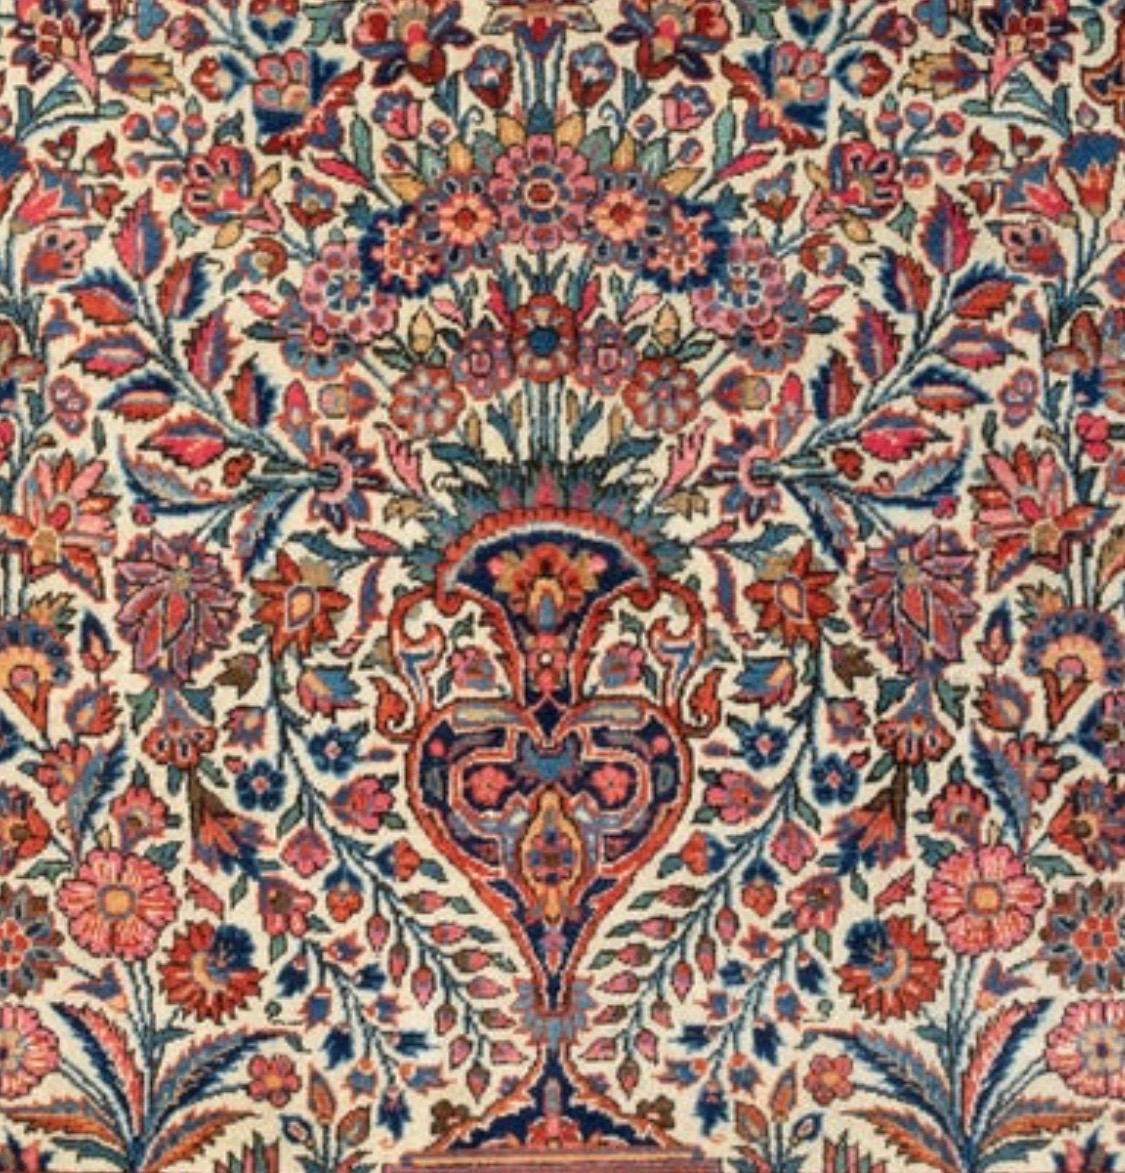 Hand-Woven Vintage Antique Persian Red Ivory White Blue Floral Kashan Small Area Rug For Sale